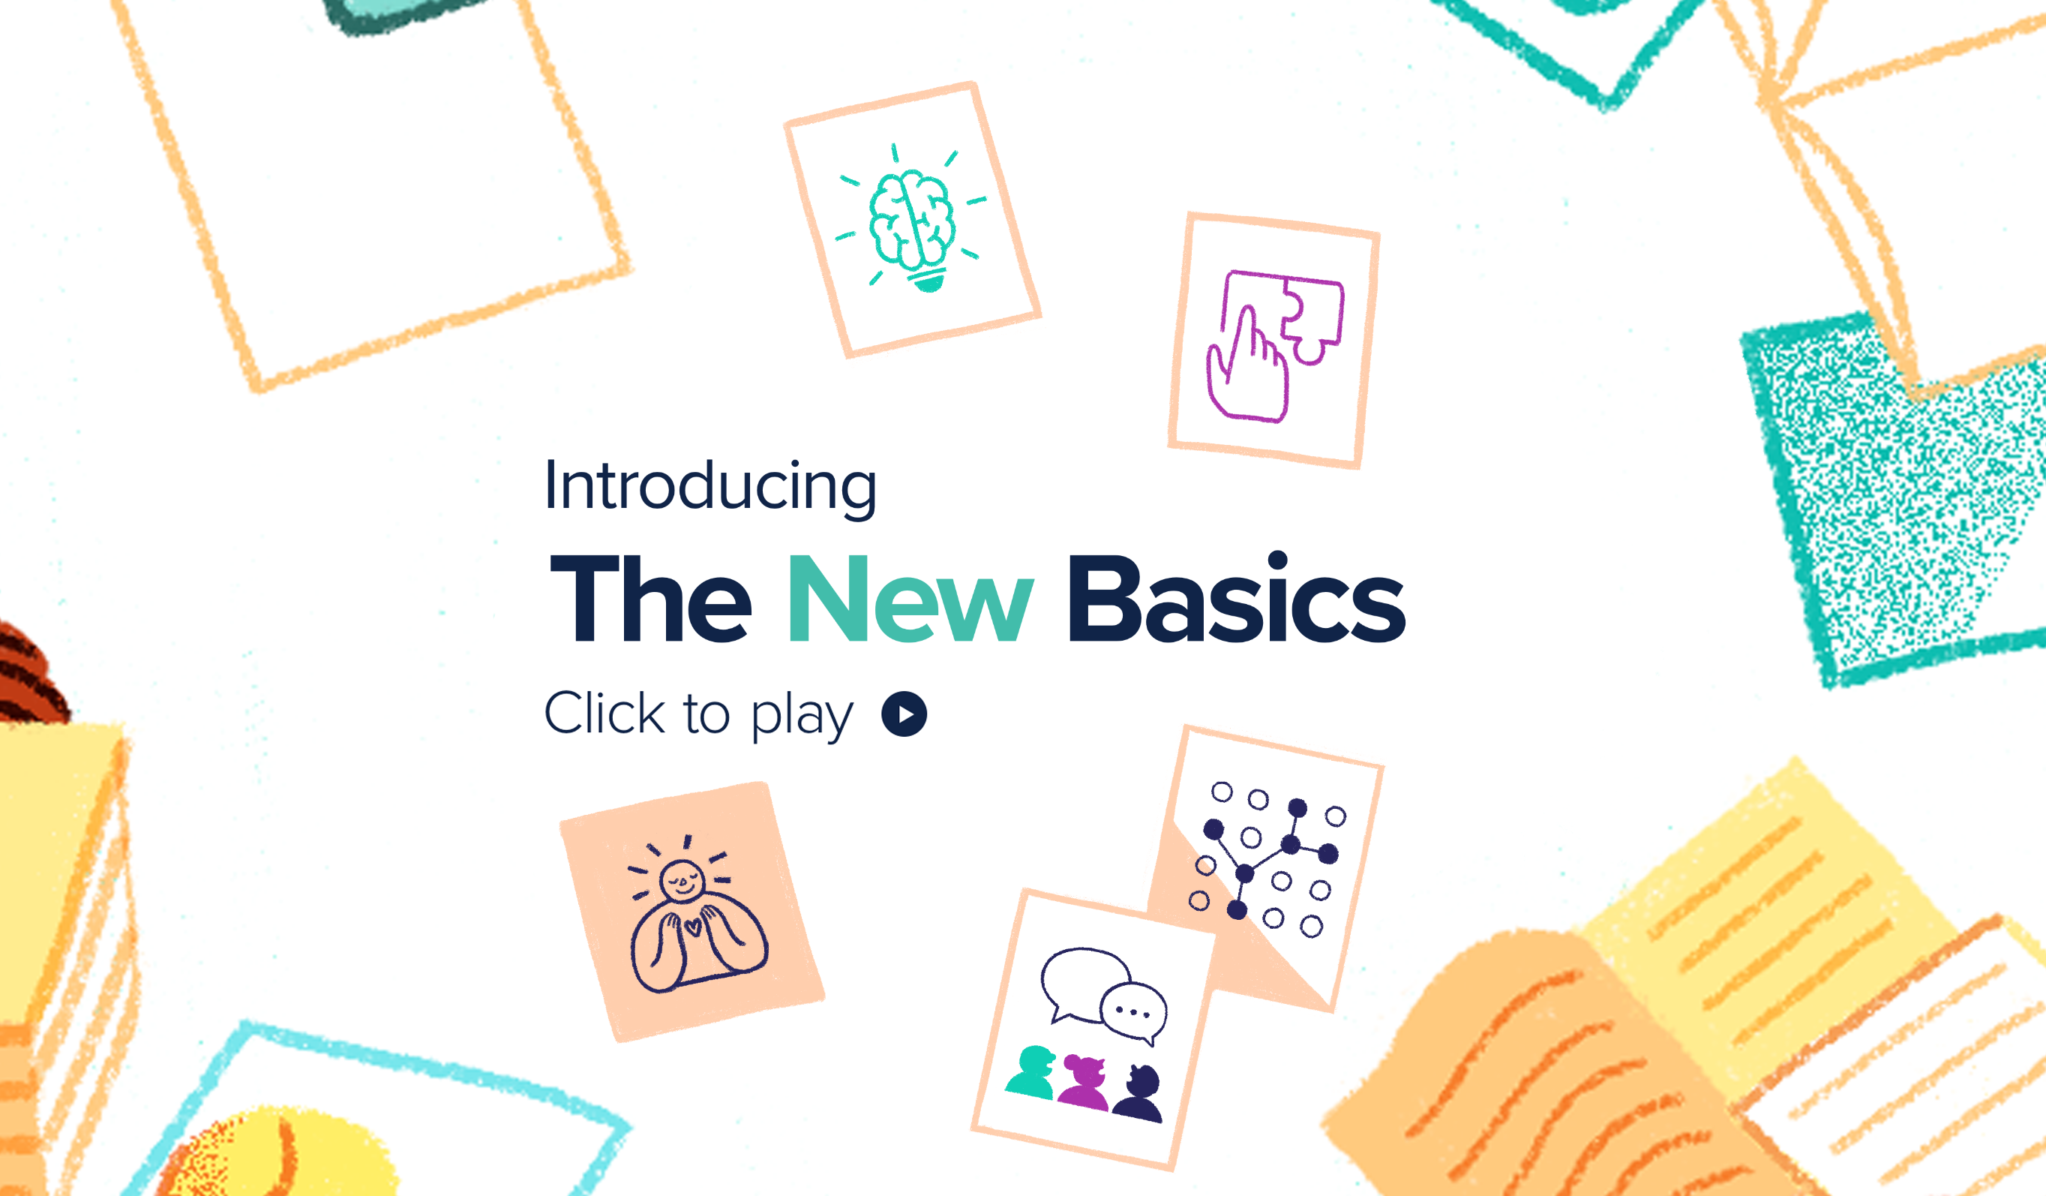 Learn about The New Basics